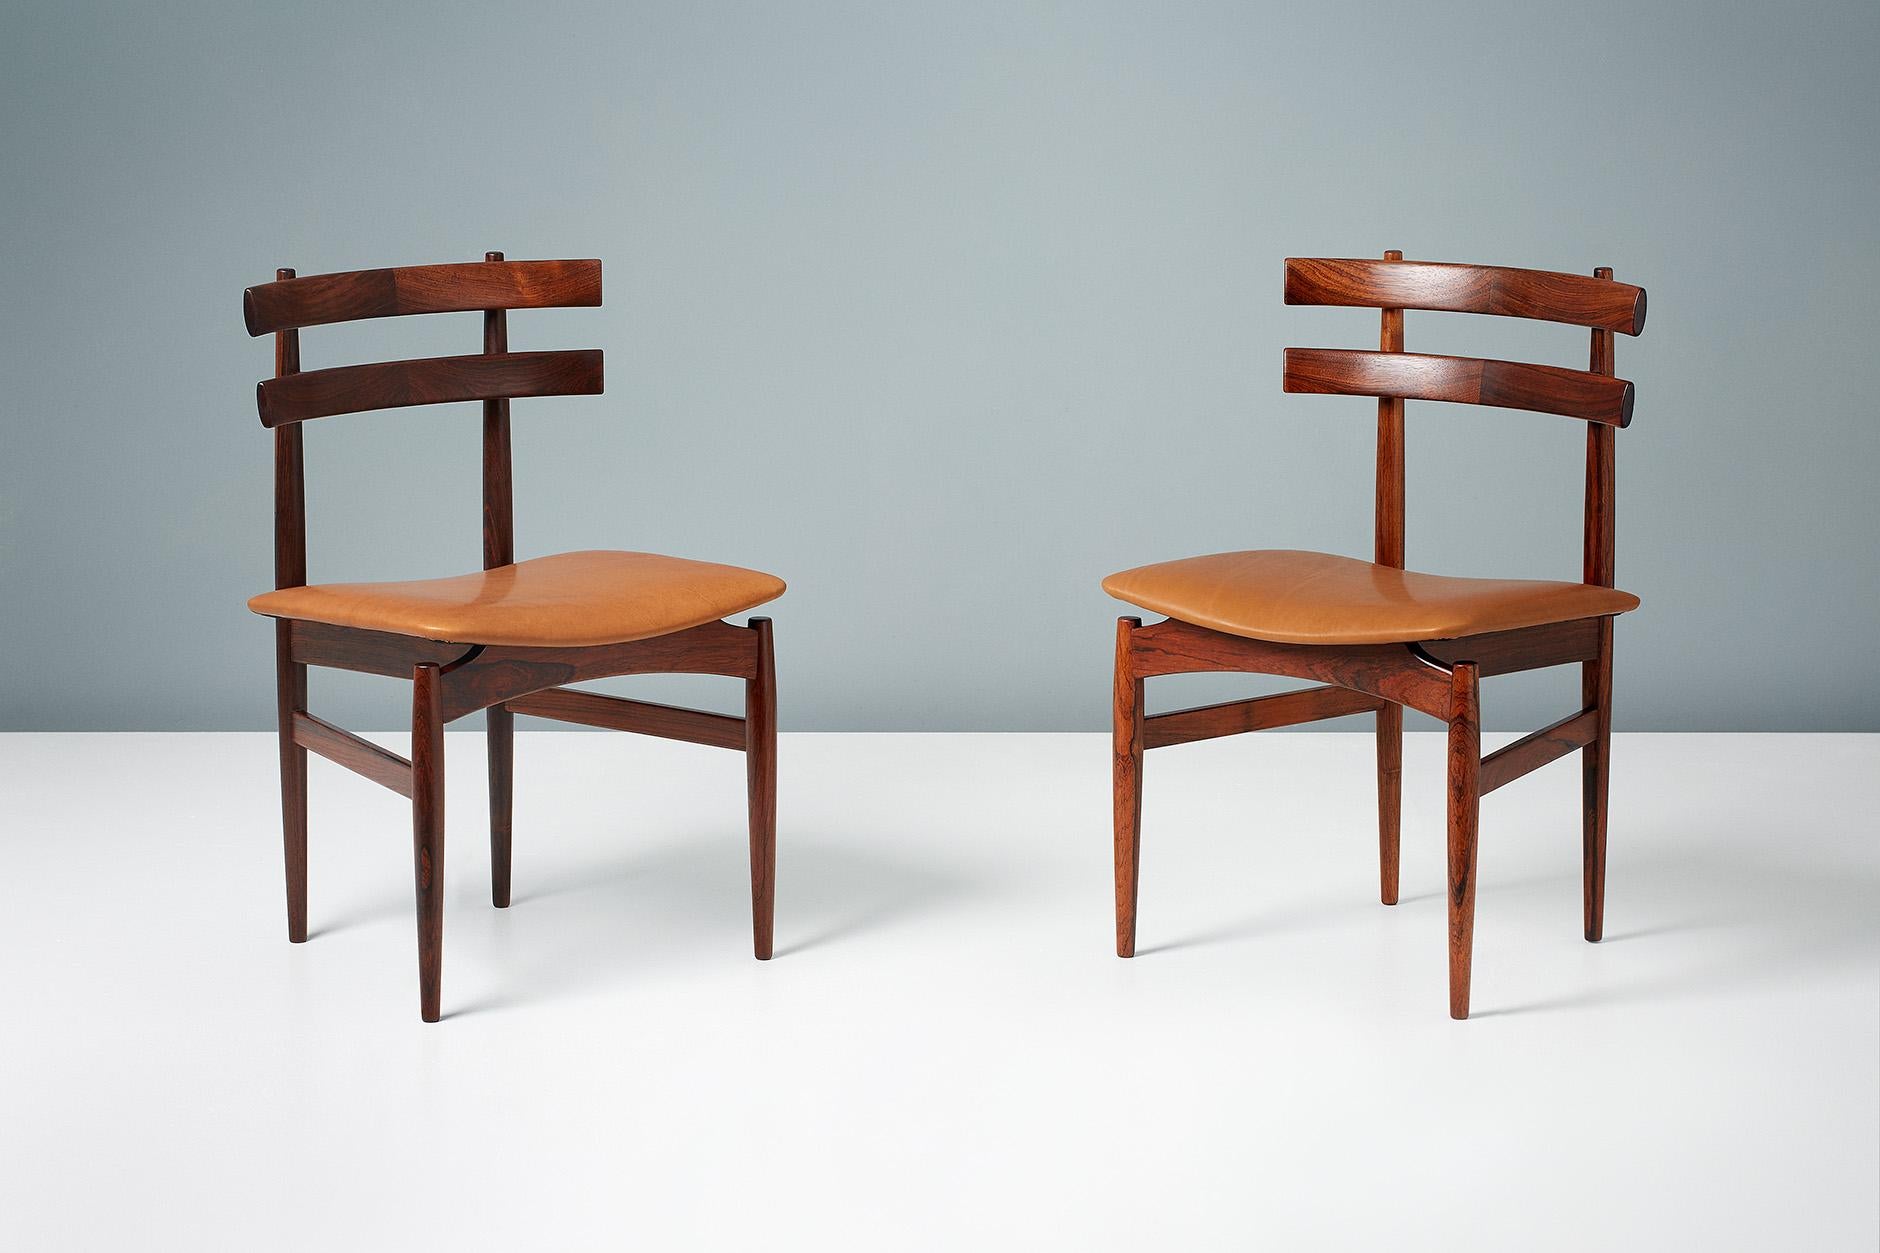 Poul Hundevad model 30 dining chairs.

Rarely seen set of 8 sculptural rosewood dining chairs by Poul Hundevad. The seats have been newly upholstered in aniline cognac brown leather. This model was manufactured by Poul Hundevad in Vamdrup,